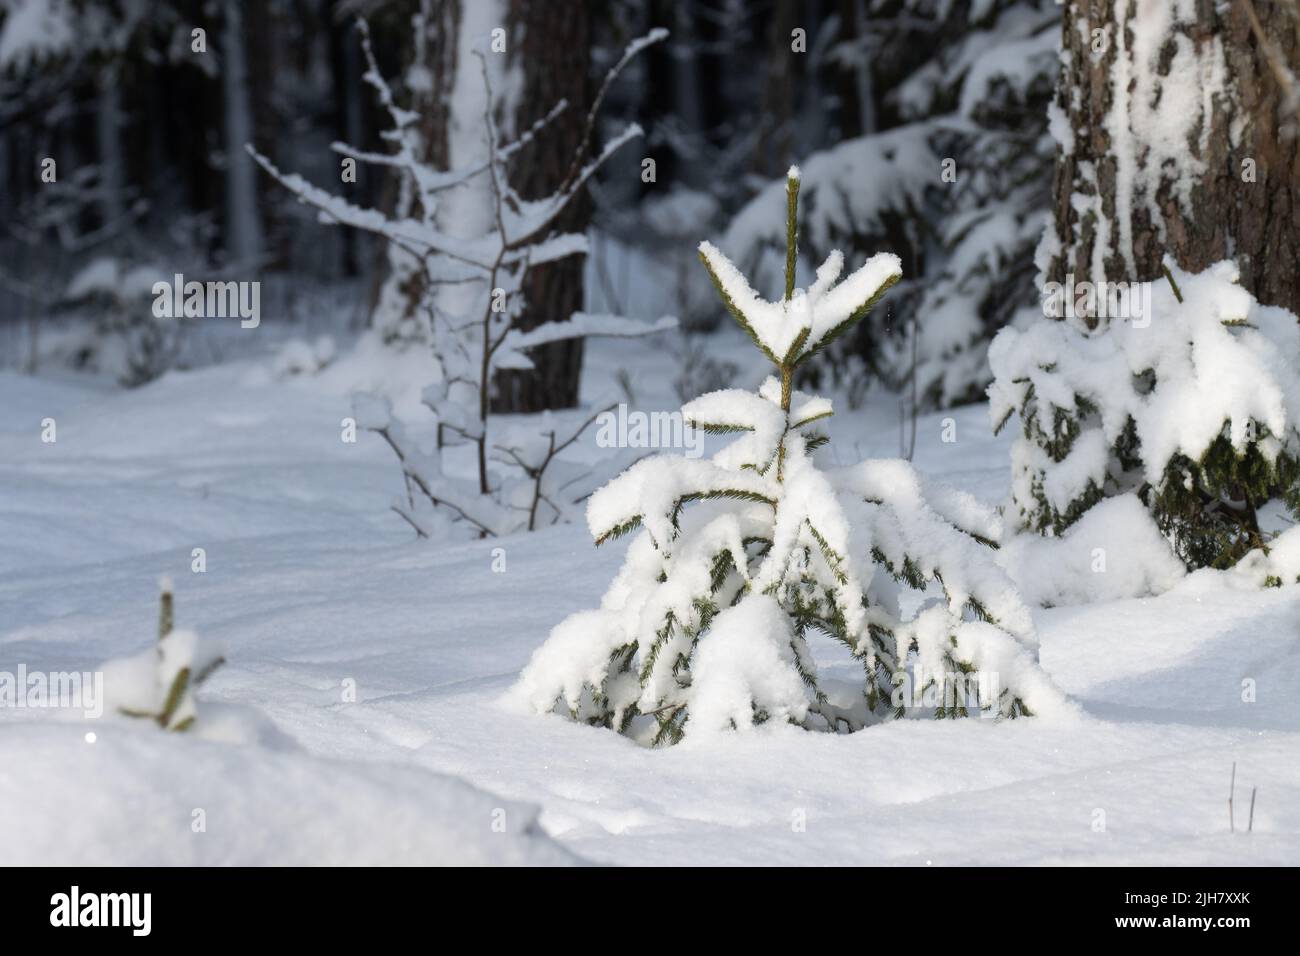 A small European Spruce, Picea abies covered with snow in Estonian boreal forest Stock Photo